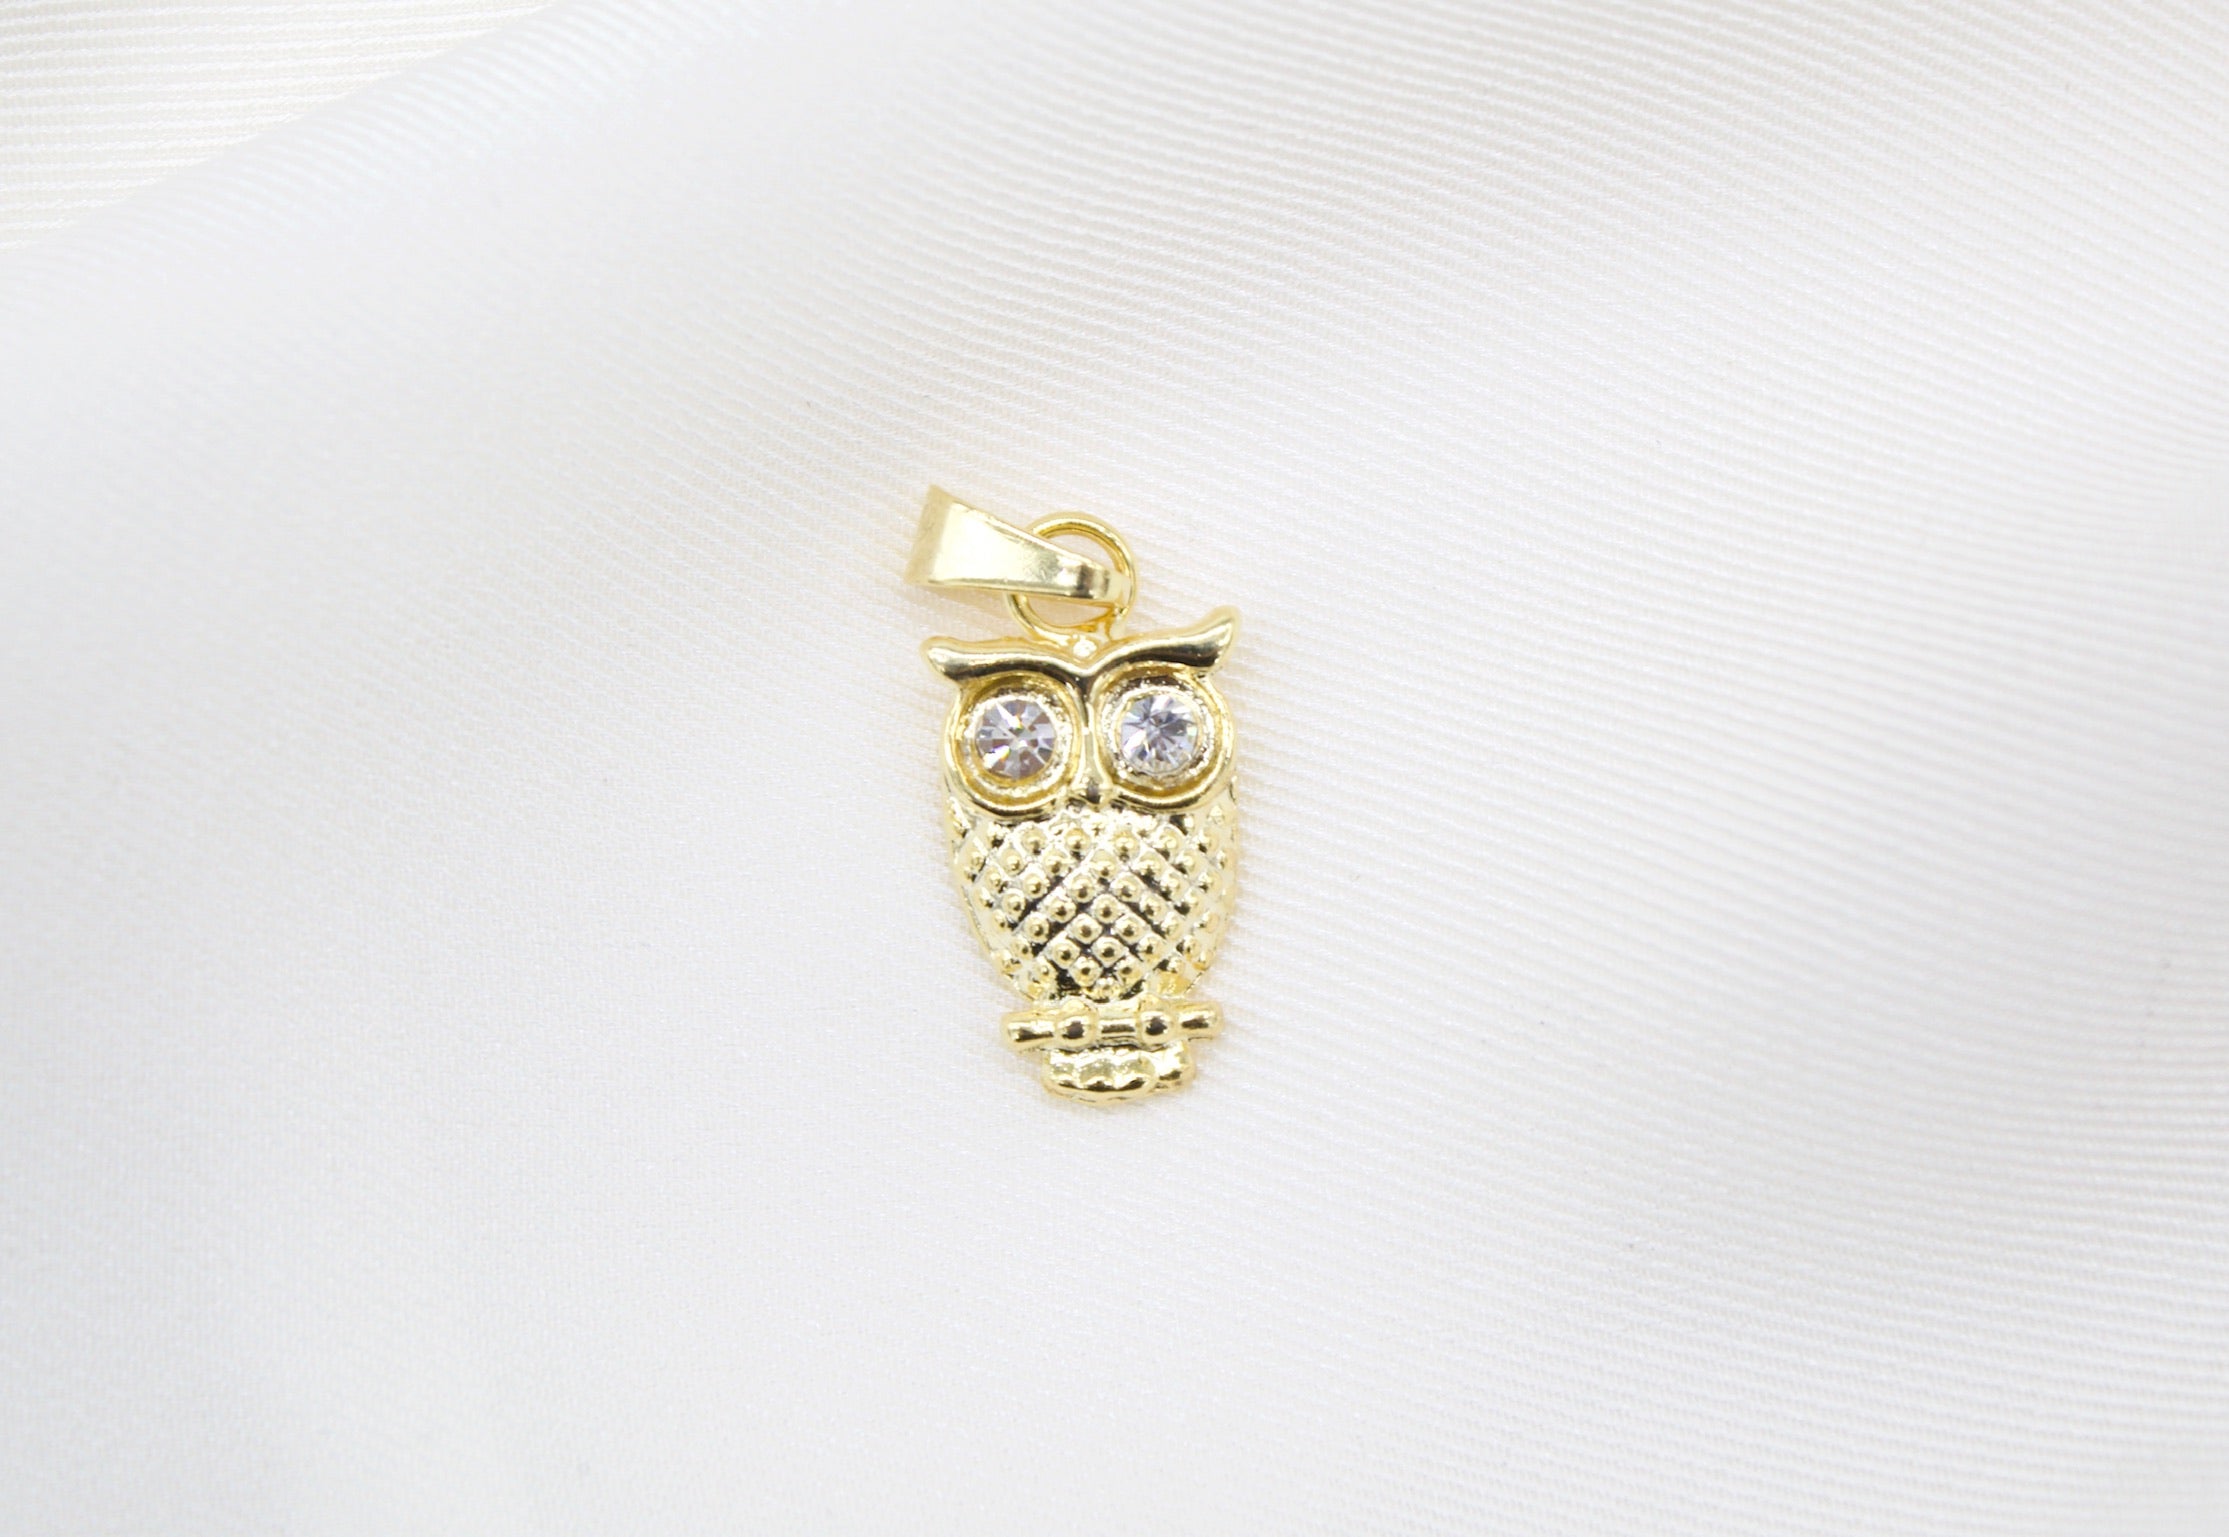 18K Gold Filled Owl Pendant With CZ Stones Eyes